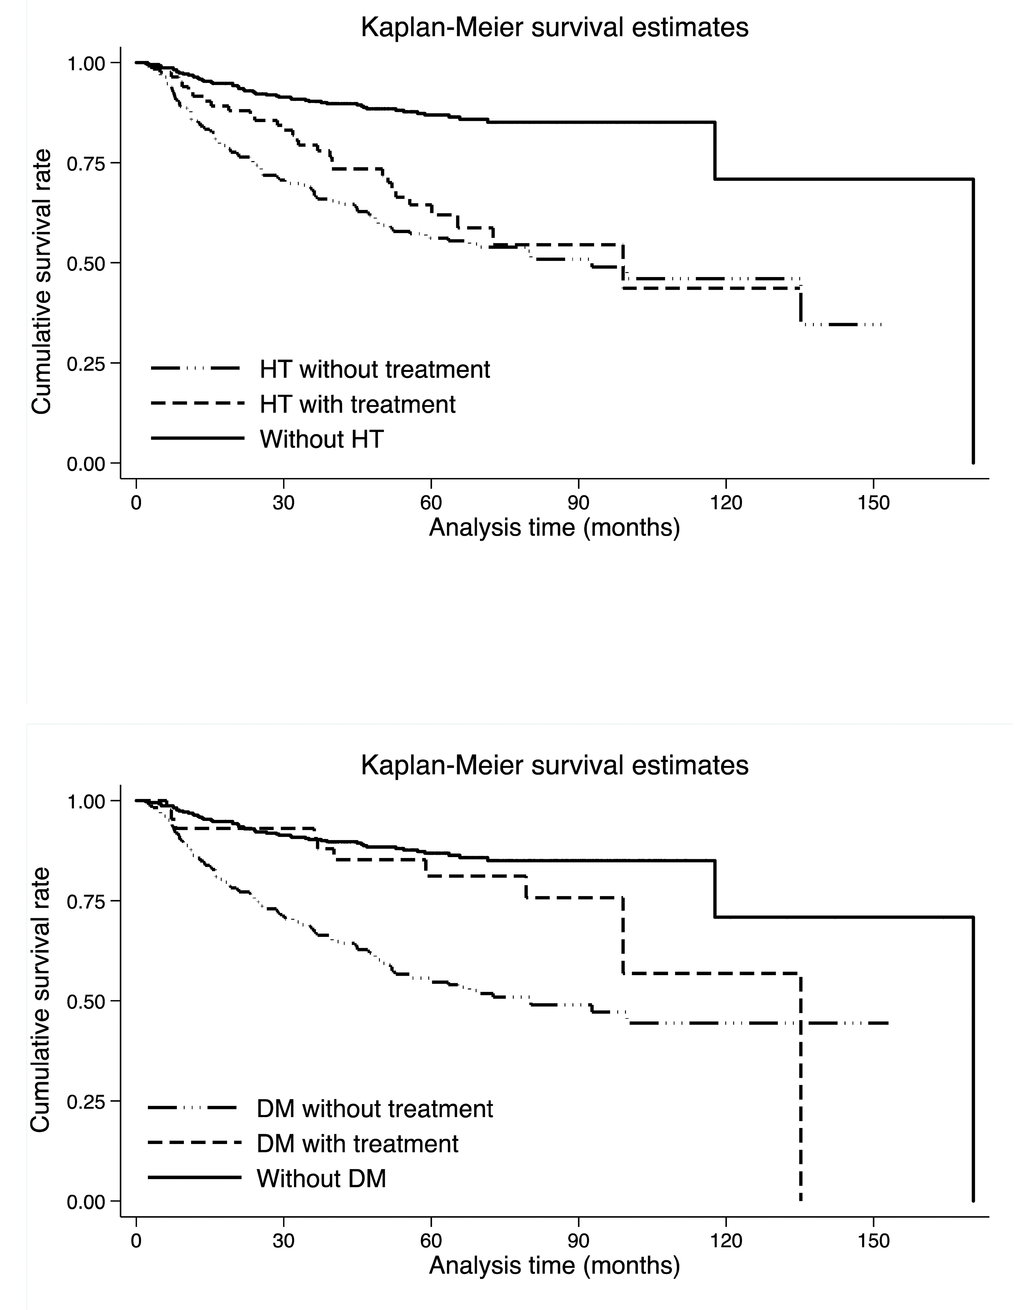 Kaplan-Meier survival curves per hypertension (the upper panel) and diabetes mellitus (the lower panel). Abbreviations: HT, hypertension; DM, diabetes mellitus. There were 384, 246 and 83 colorectal cancer patients without hypertension, with untreated hypertension and with treated hypertension, respectively. There were 385, 285 and 43 colorectal cancer patients without diabetes mellitus, with untreated diabetes mellitus and with treated diabetes mellitus, respectively. The Log-rank test was statistically significant for both hypertension and diabetes mellitus medications (p 